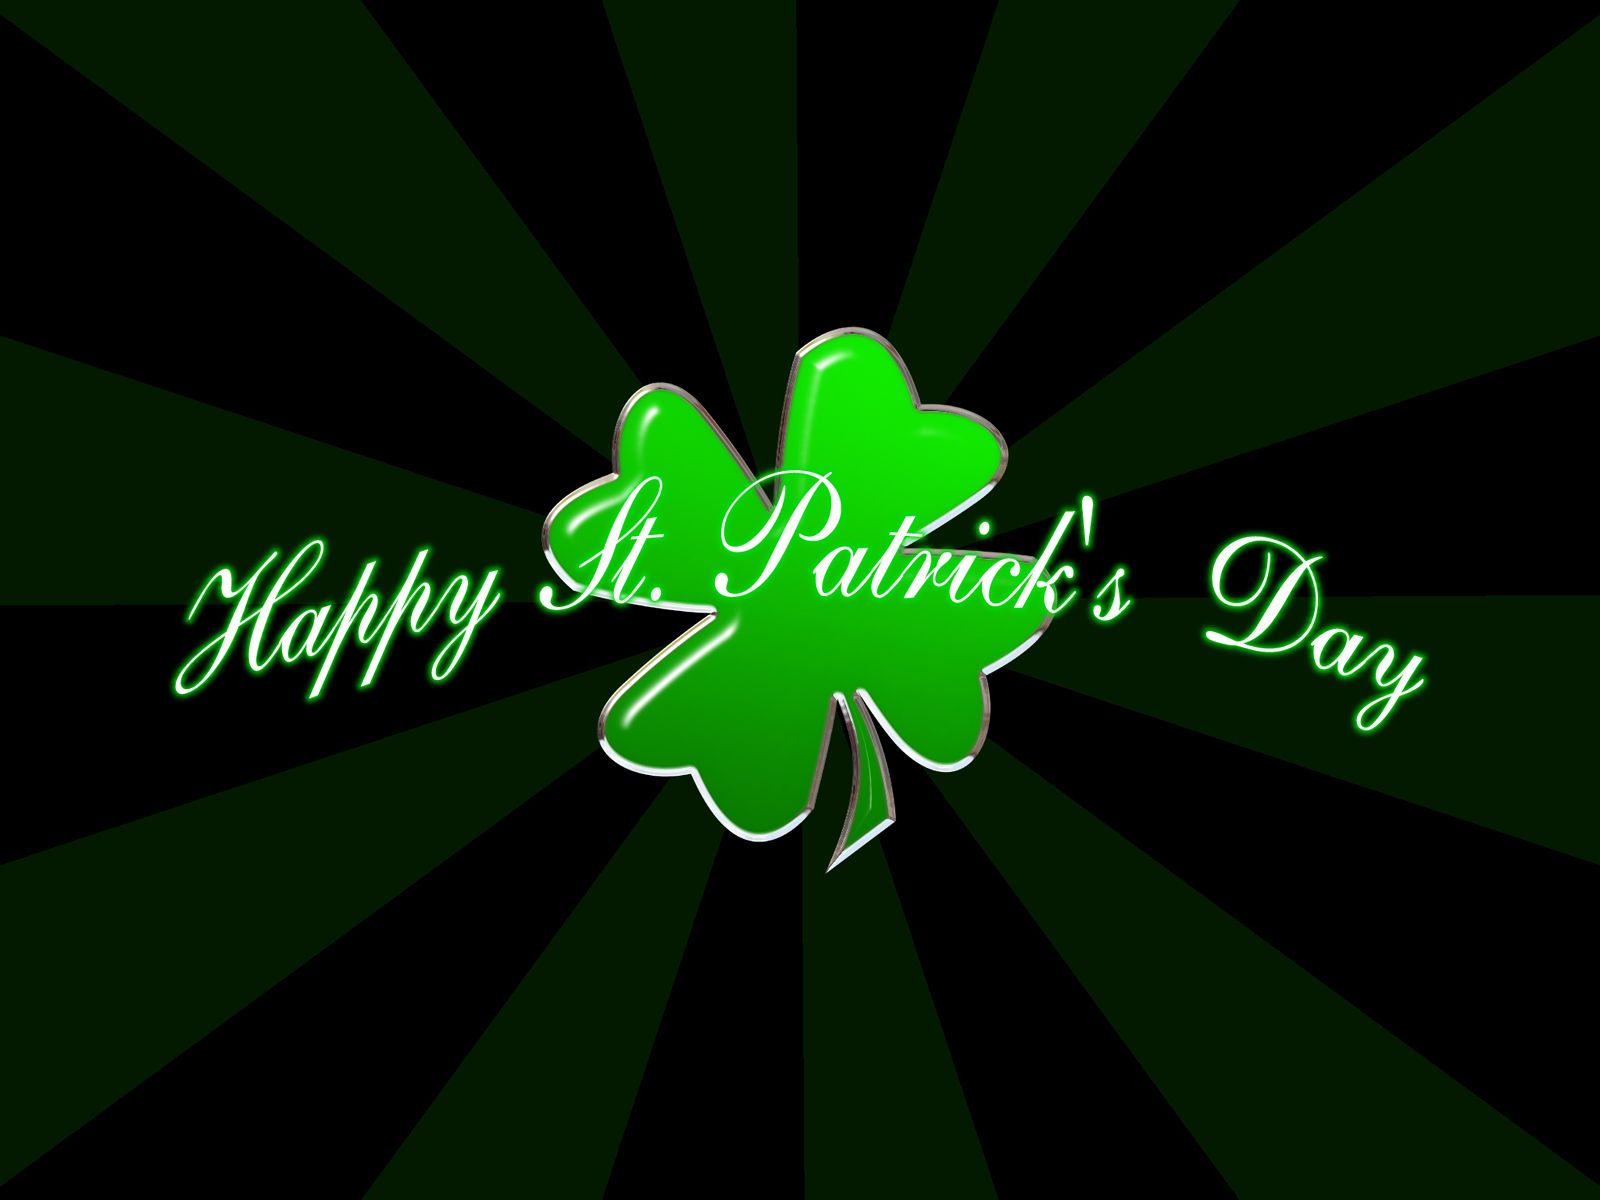 St Patrick's Day Wallpaper Background